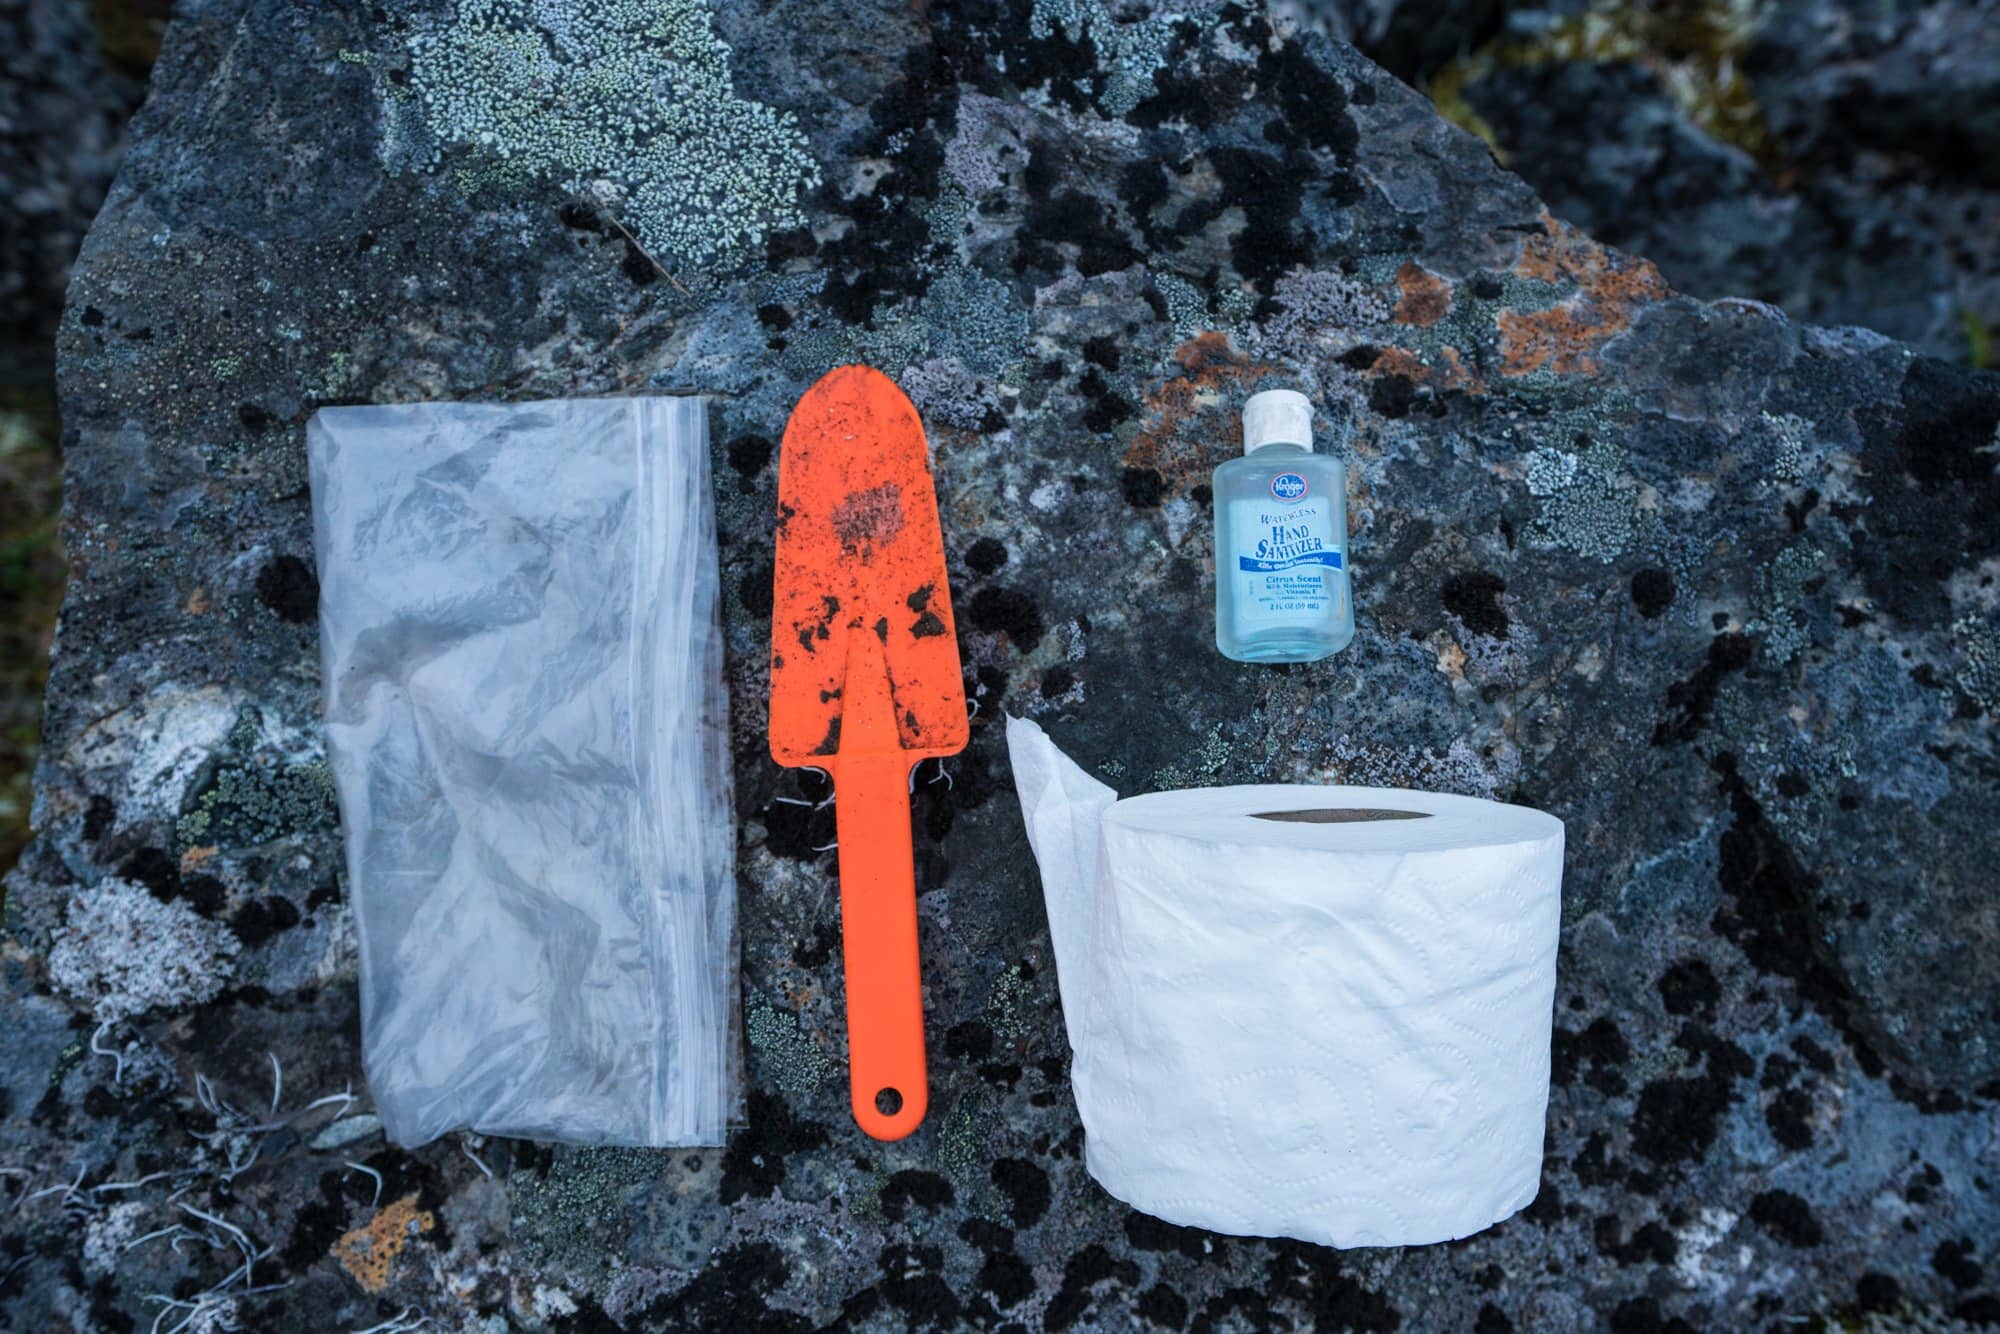 An orange trowel, toilet paper roll, hand sanitizer, and Ziploc bag laid out on the ground. This is a poop kit for backpackers.